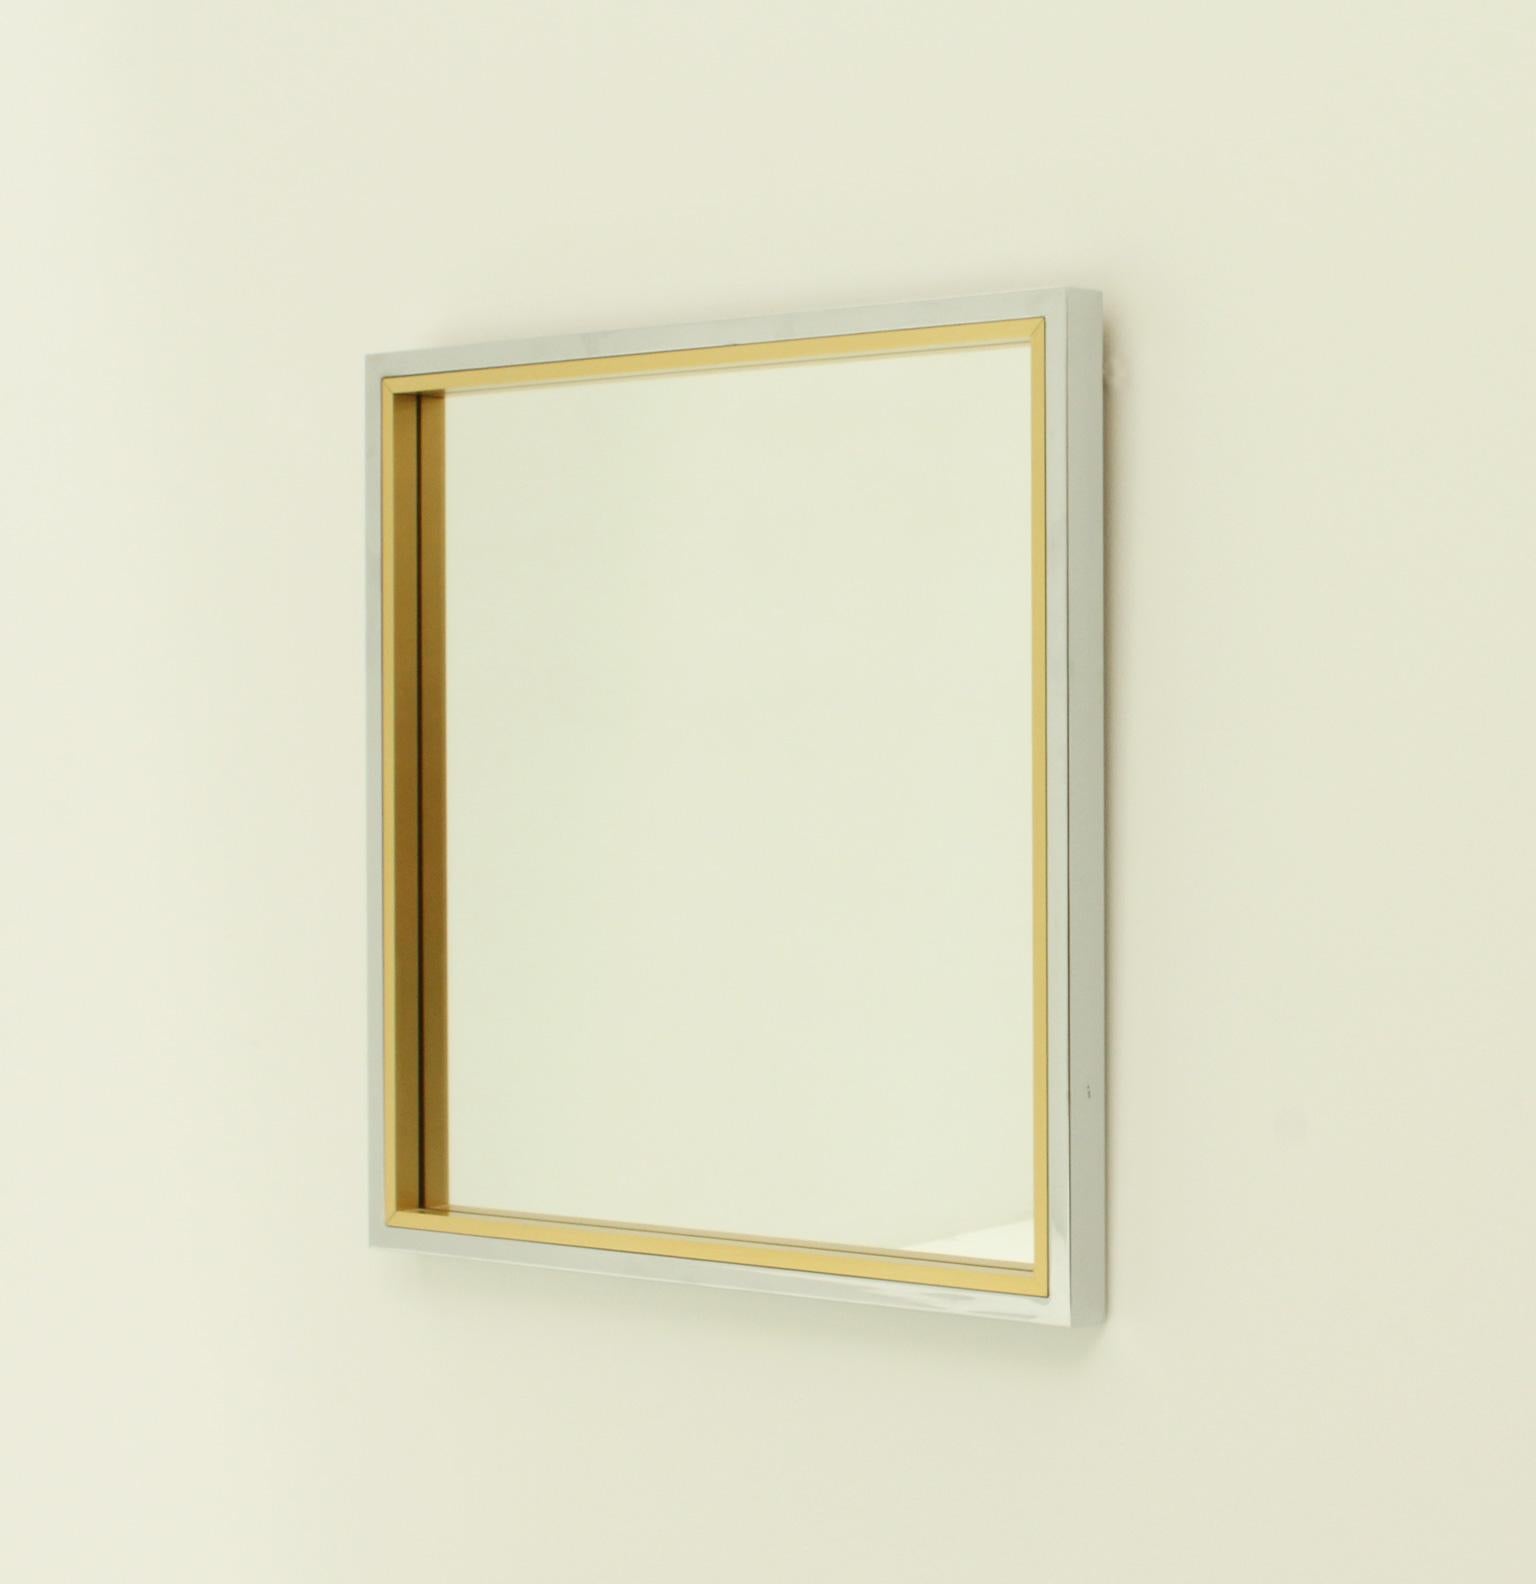 Italian Square Wall Mirror in Brass and Chrome from 1970's For Sale 3